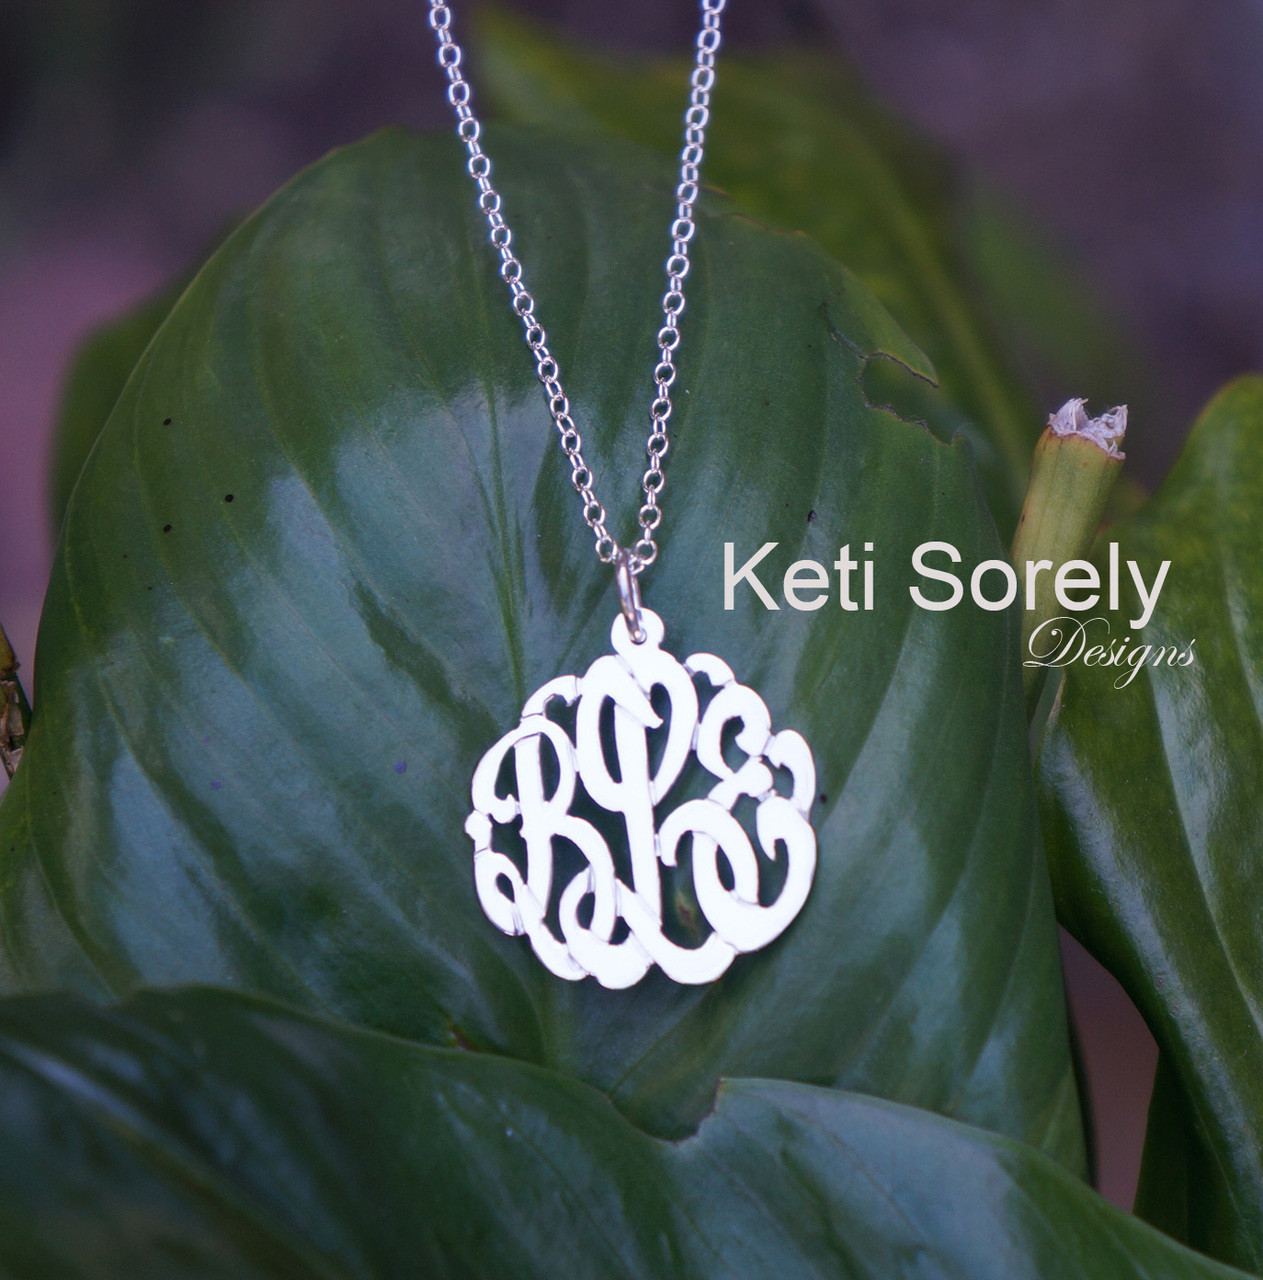 Custom made monogram pendant with personalized initials in script font